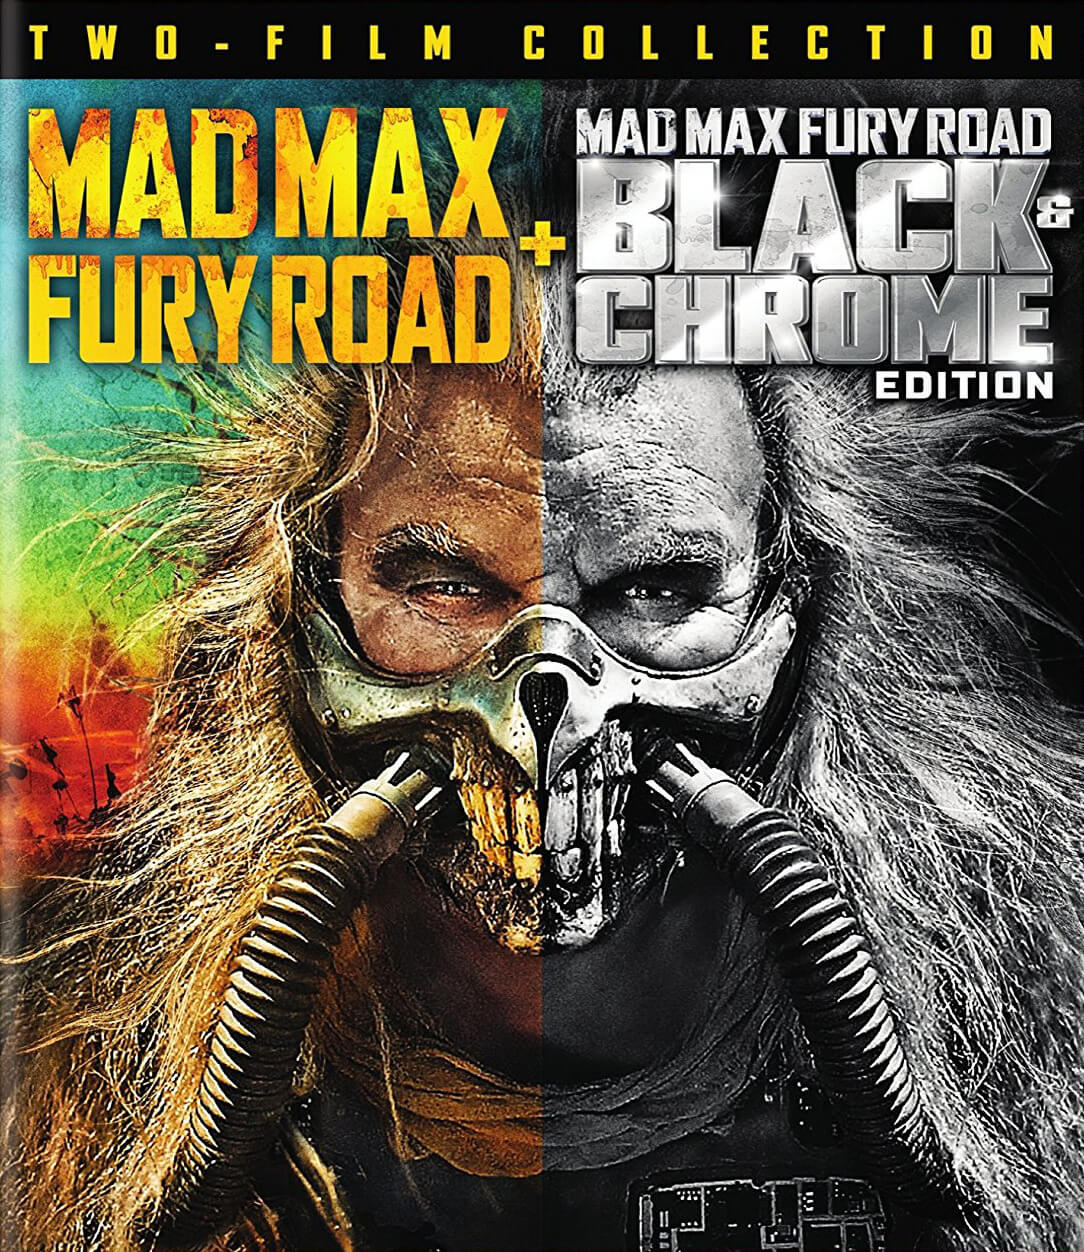 mad max fury road full movie with english subtitles